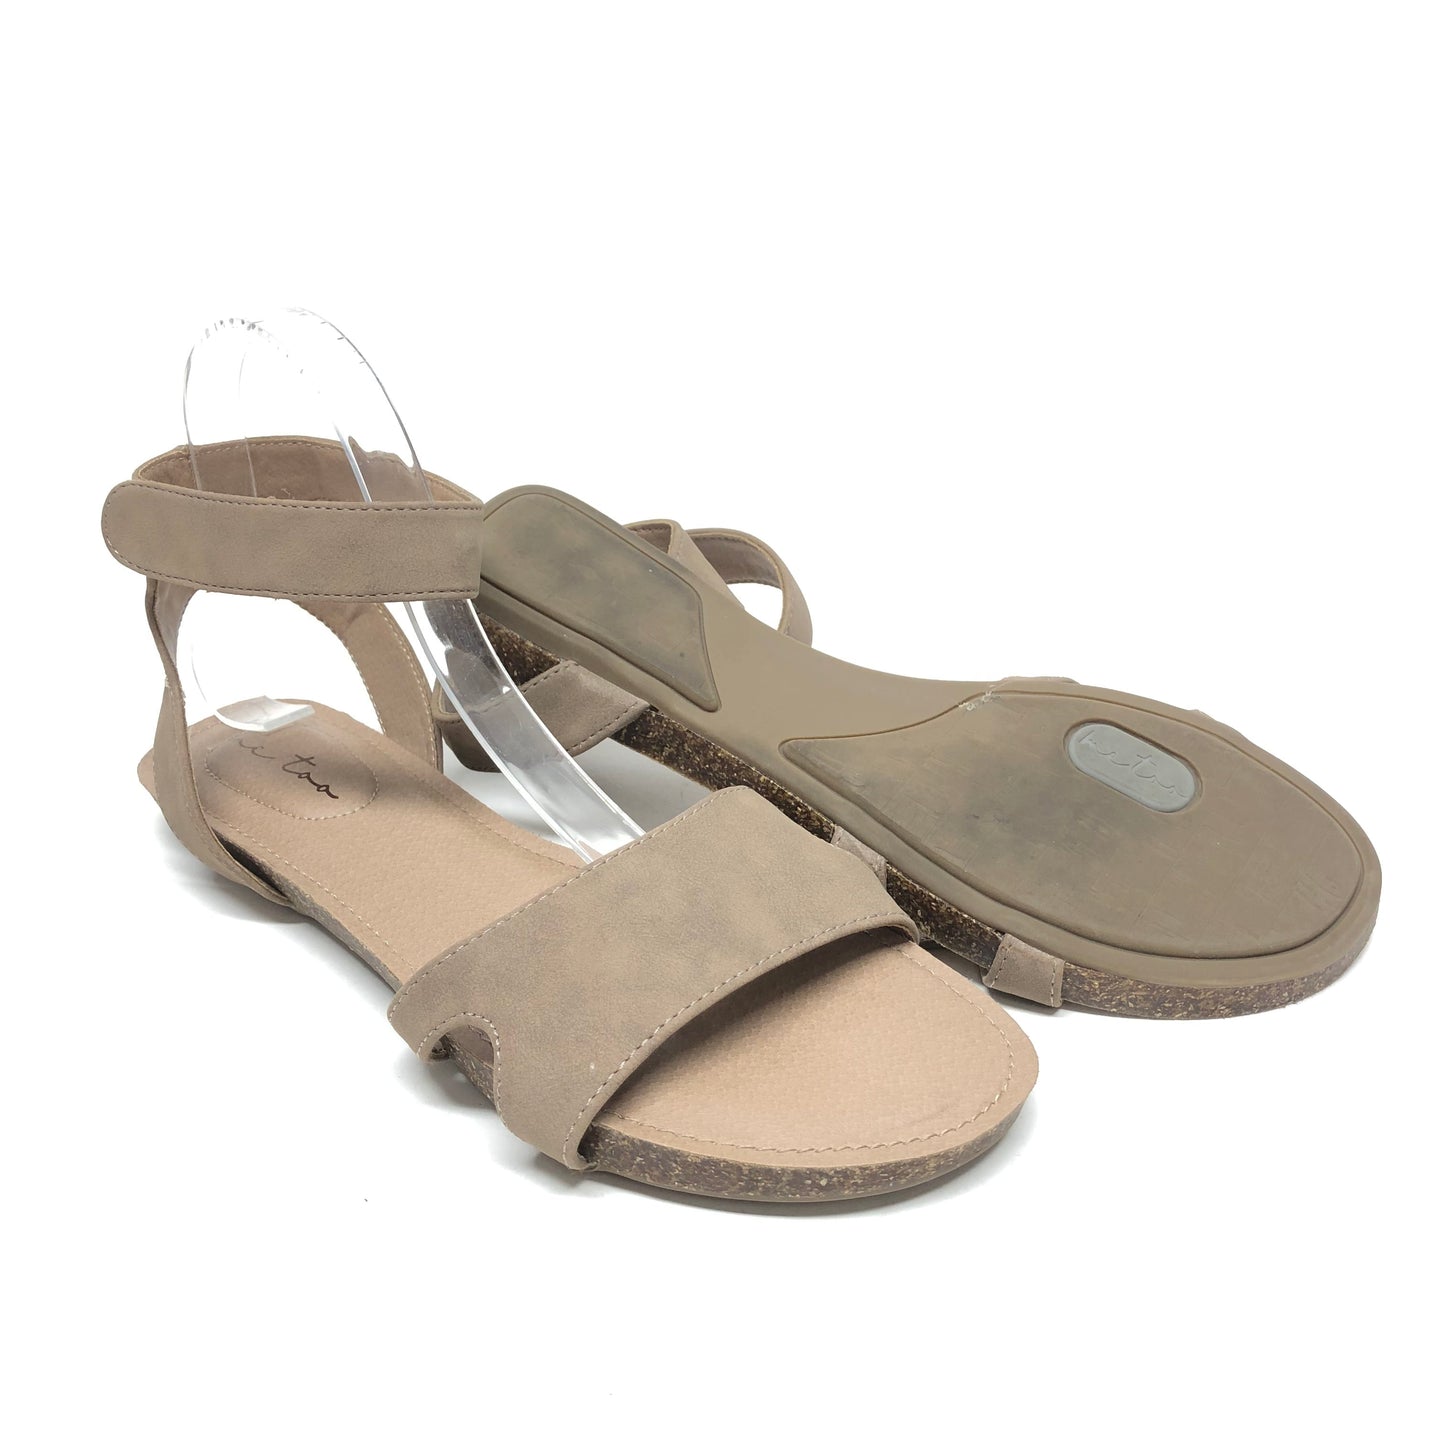 Taupe Sandals Flats Me Too, Size 9.5